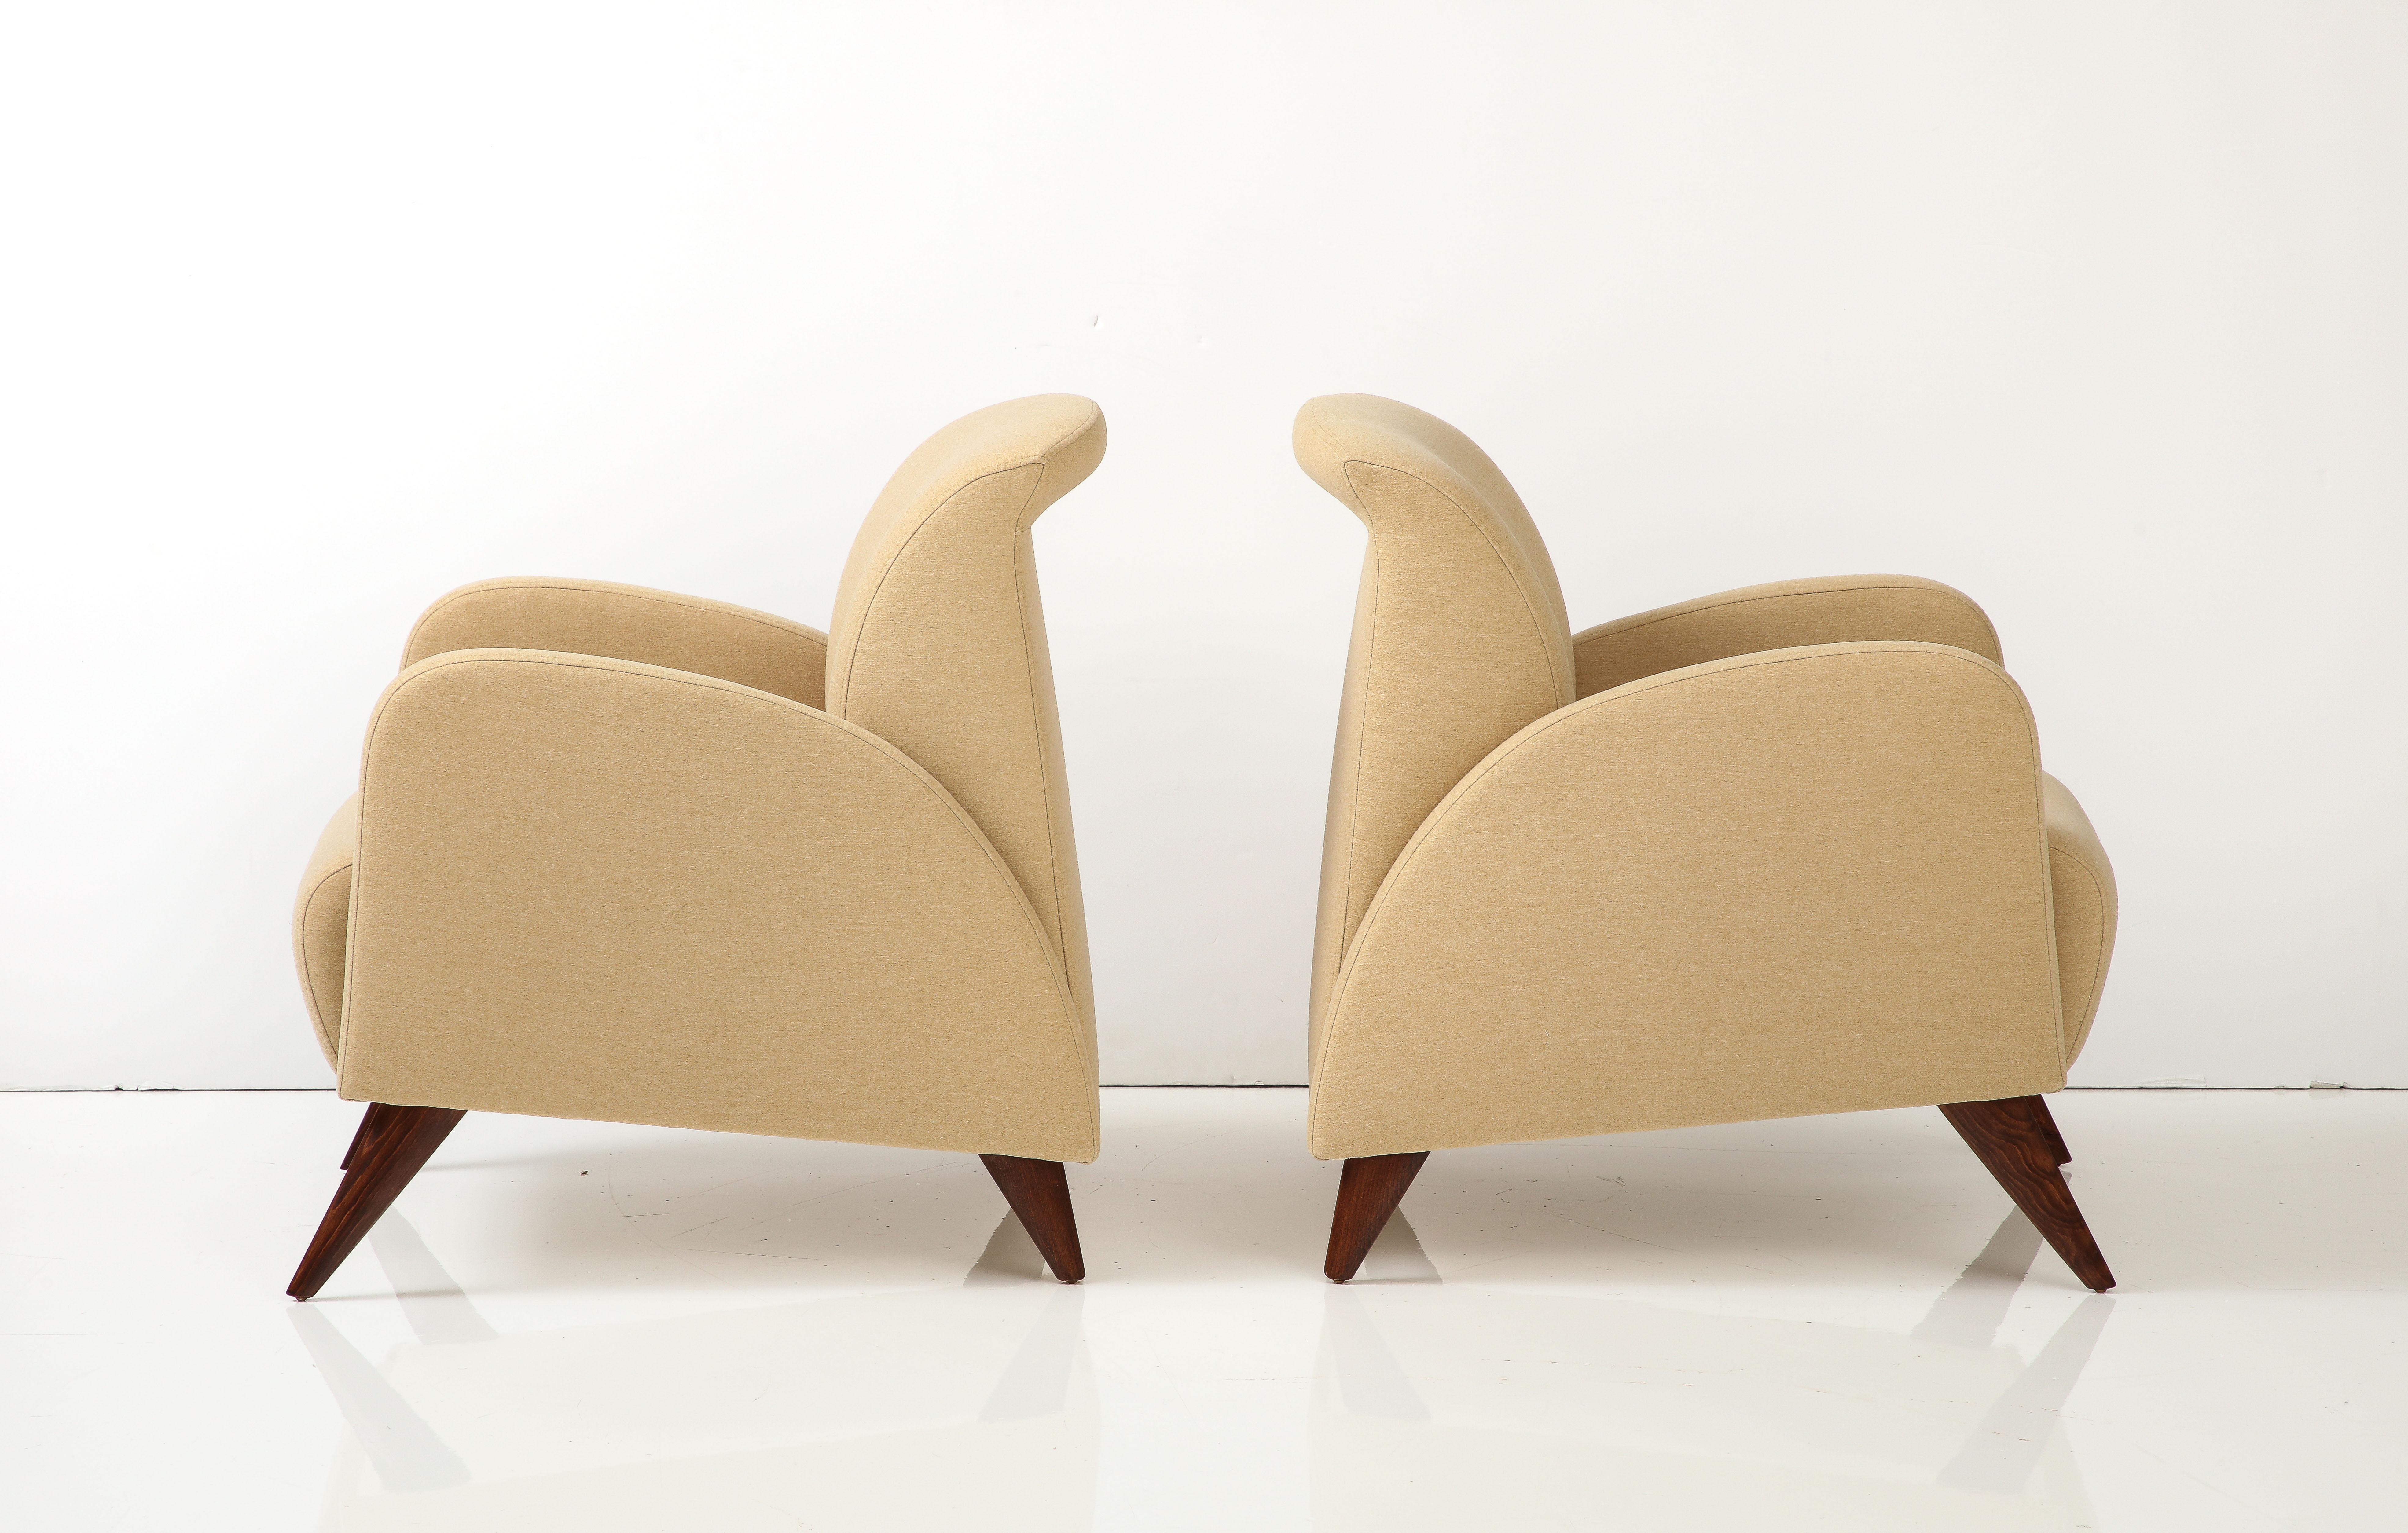 Pair of Italian Art Deco Lounge Chairs, circa 1940 For Sale 3